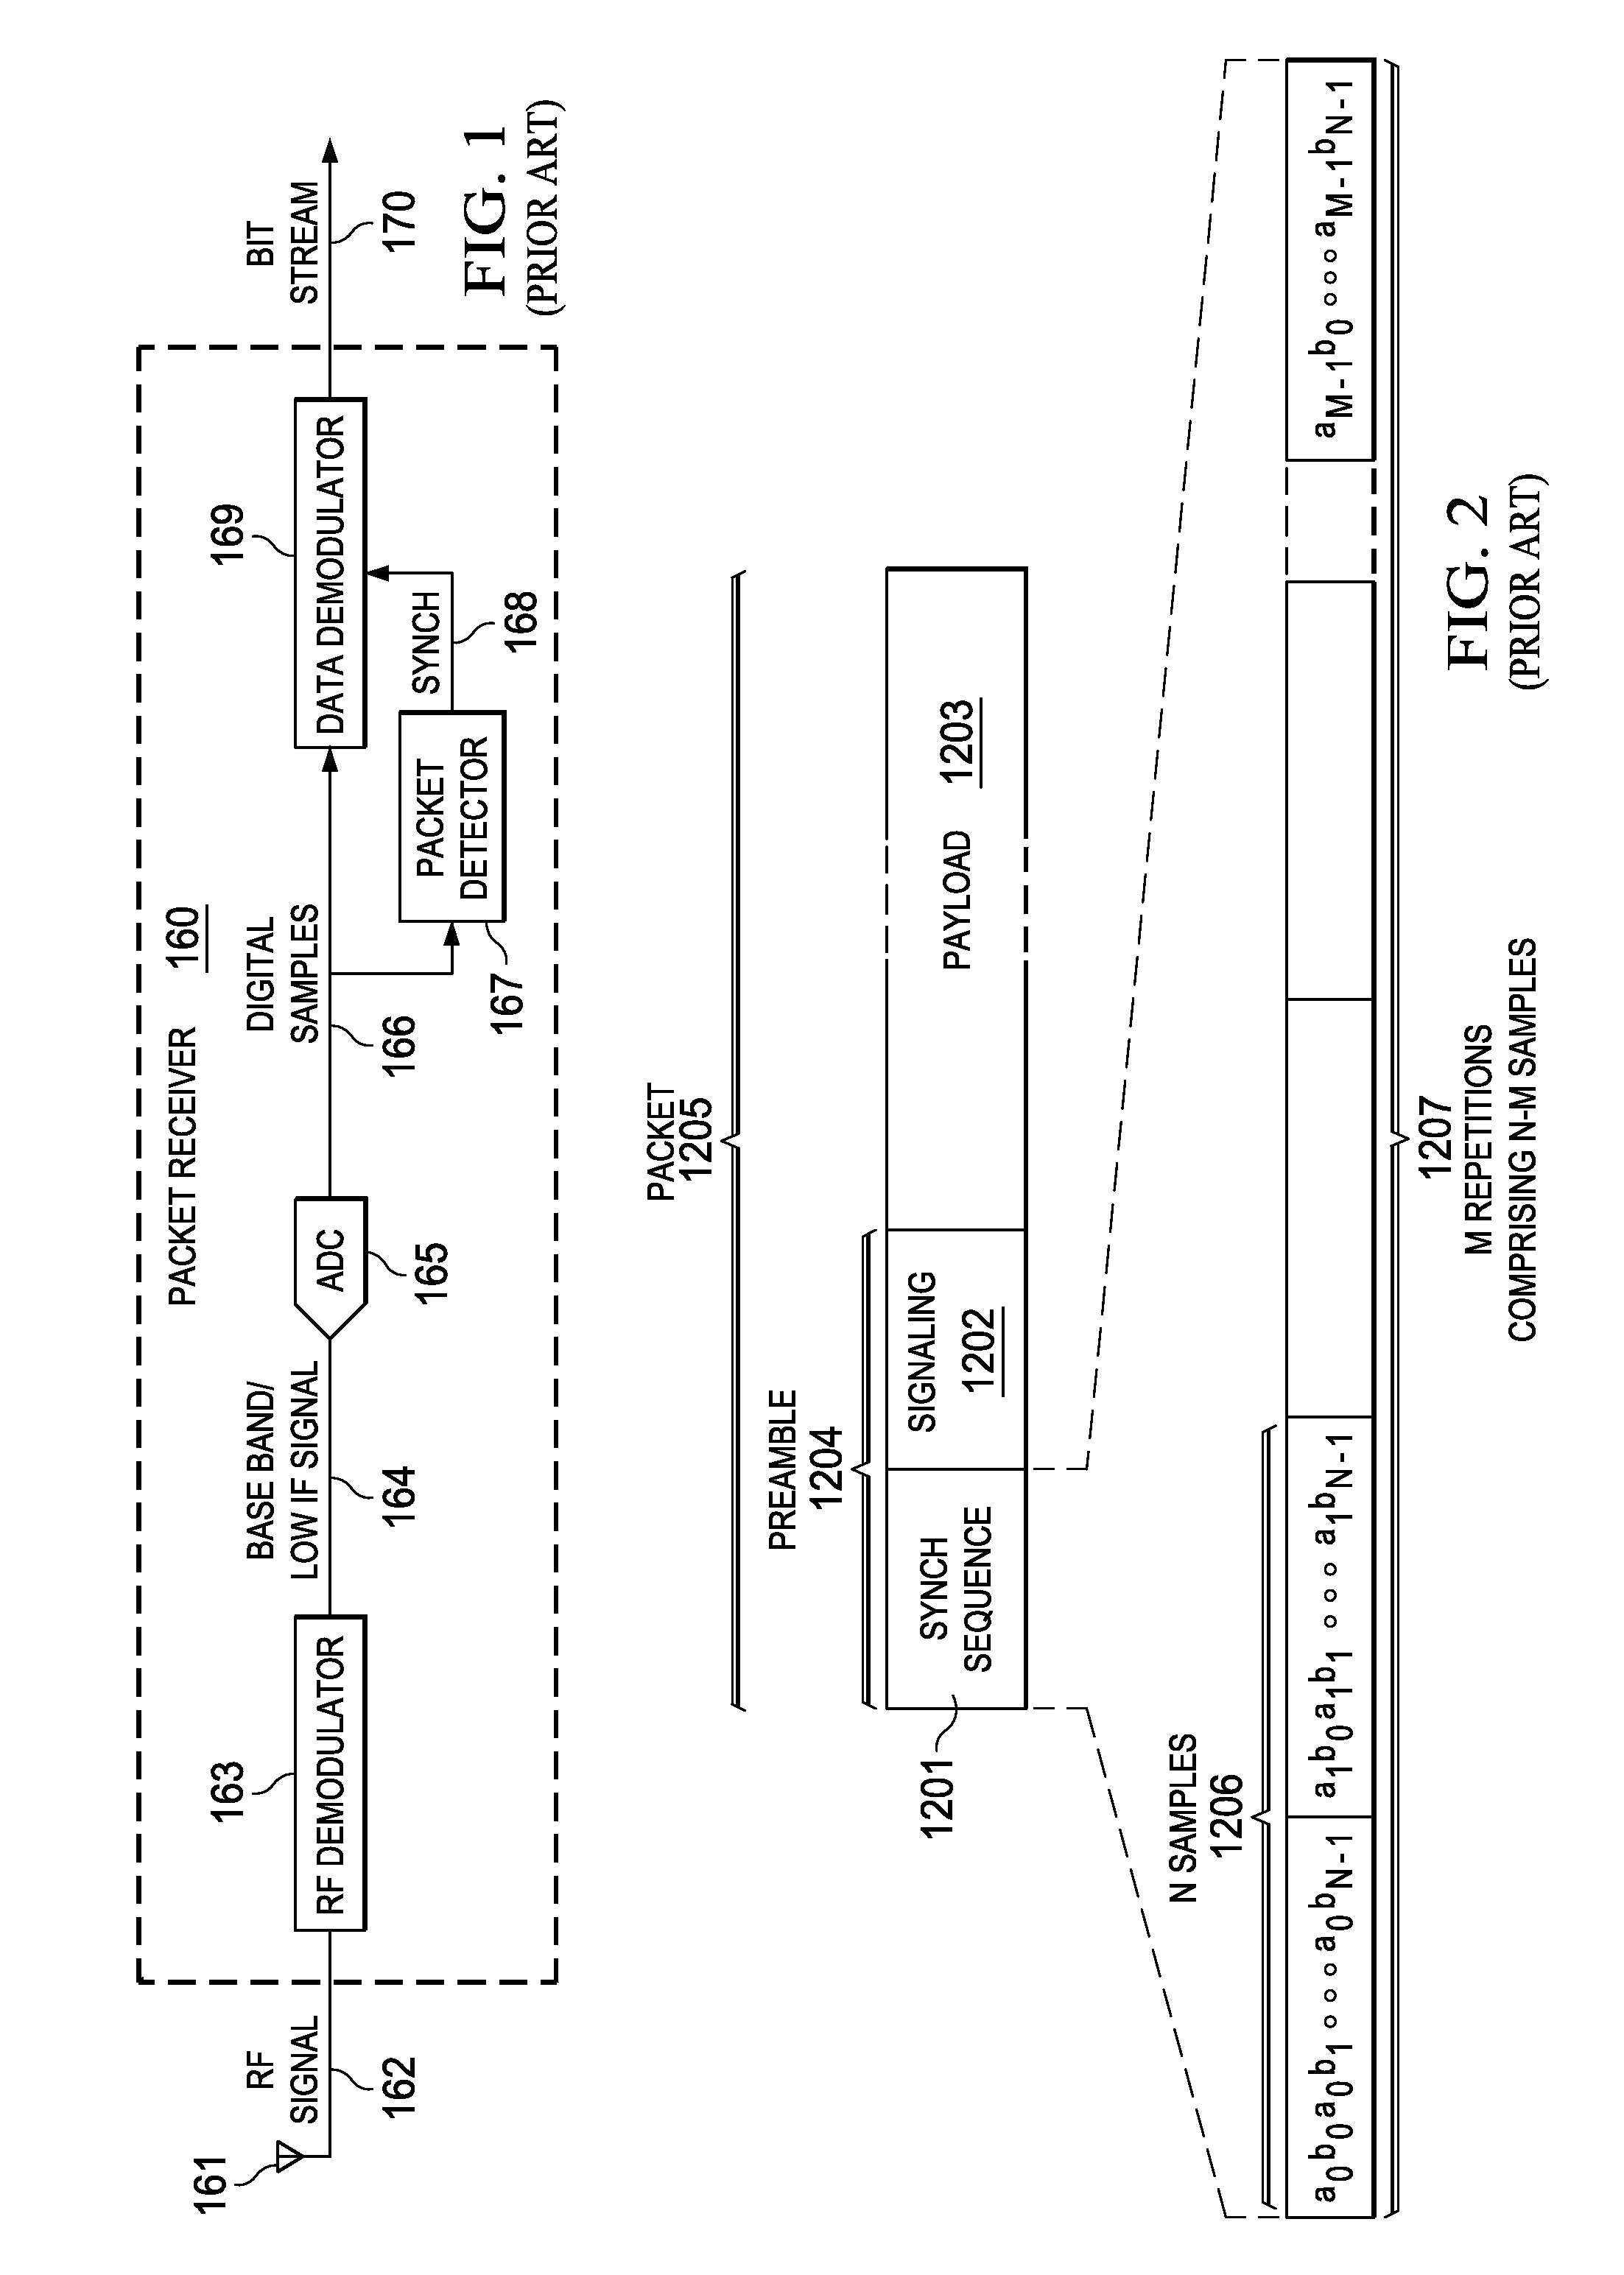 Apparatus for and method of robust packet detection and frequency offset estimation